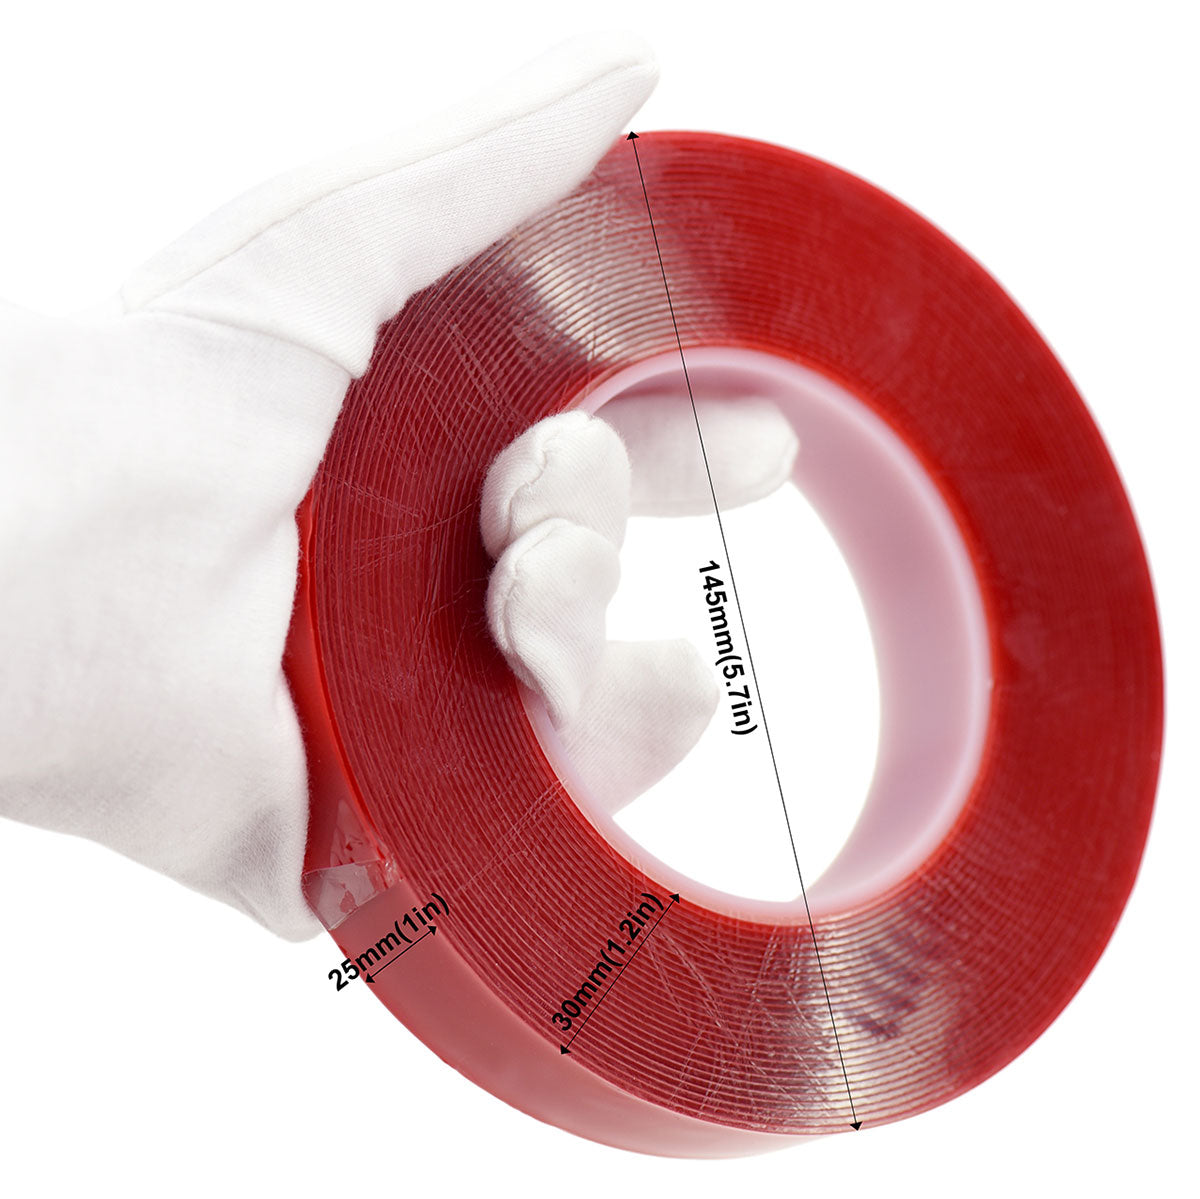 25mm x 1mm x 10 meters Multi-Purpose High Strength Transparent Acrylic Gel Adhesive Double Sided Tape Roll No Residue